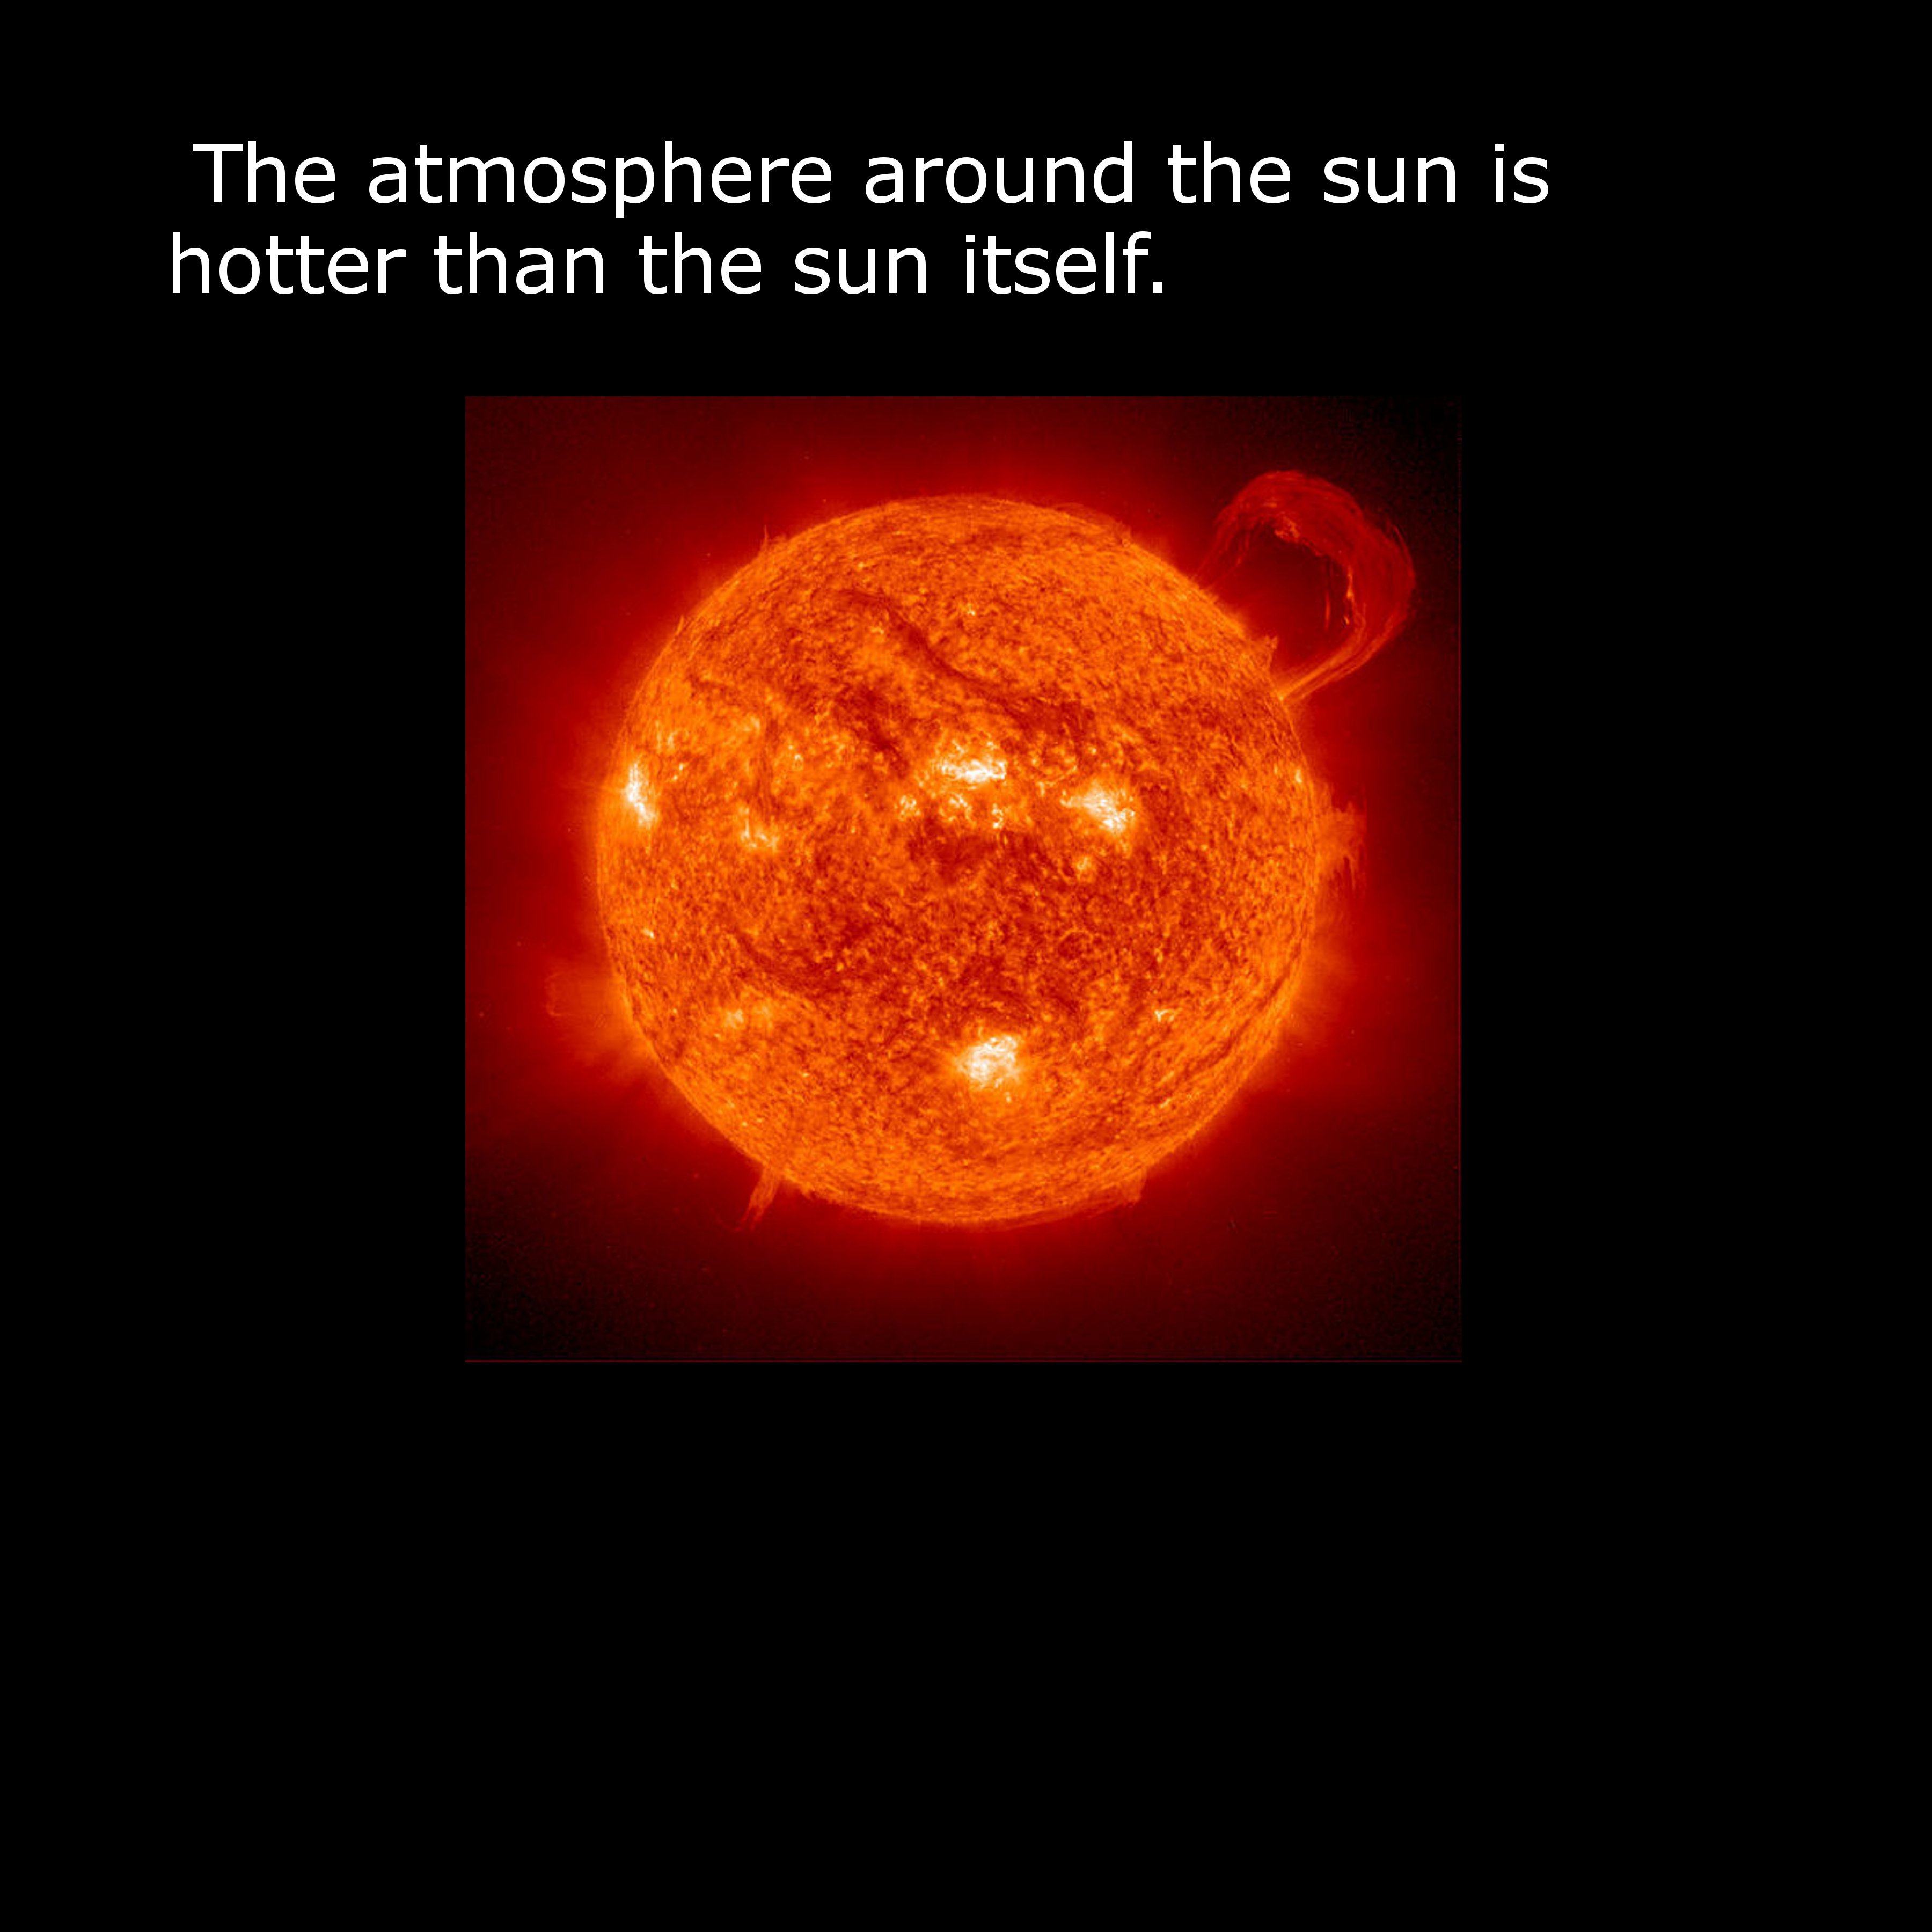 hubble telescope pictures of sun - The atmosphere around the sun is hotter than the sun itself.